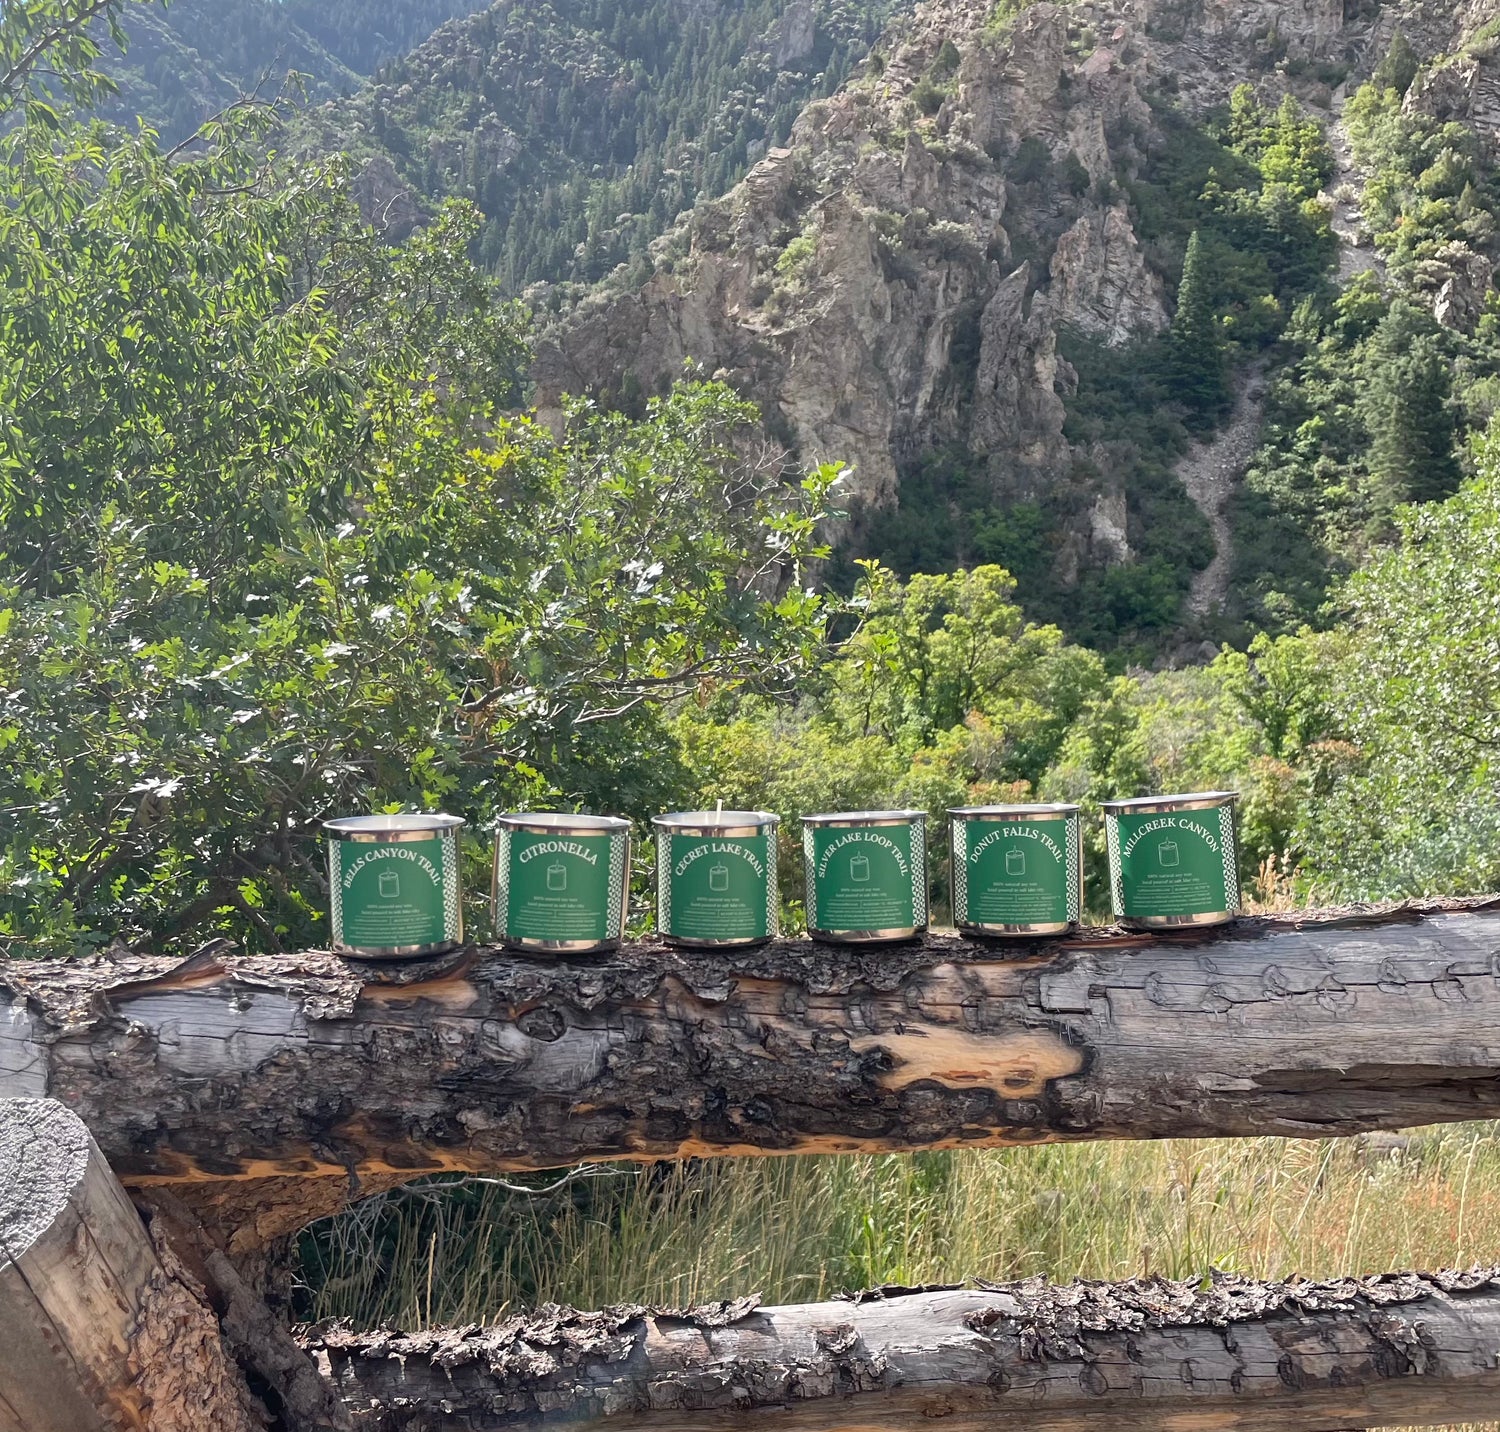 Trail Blaze Candles - Hand poured candles in Salt Lake City